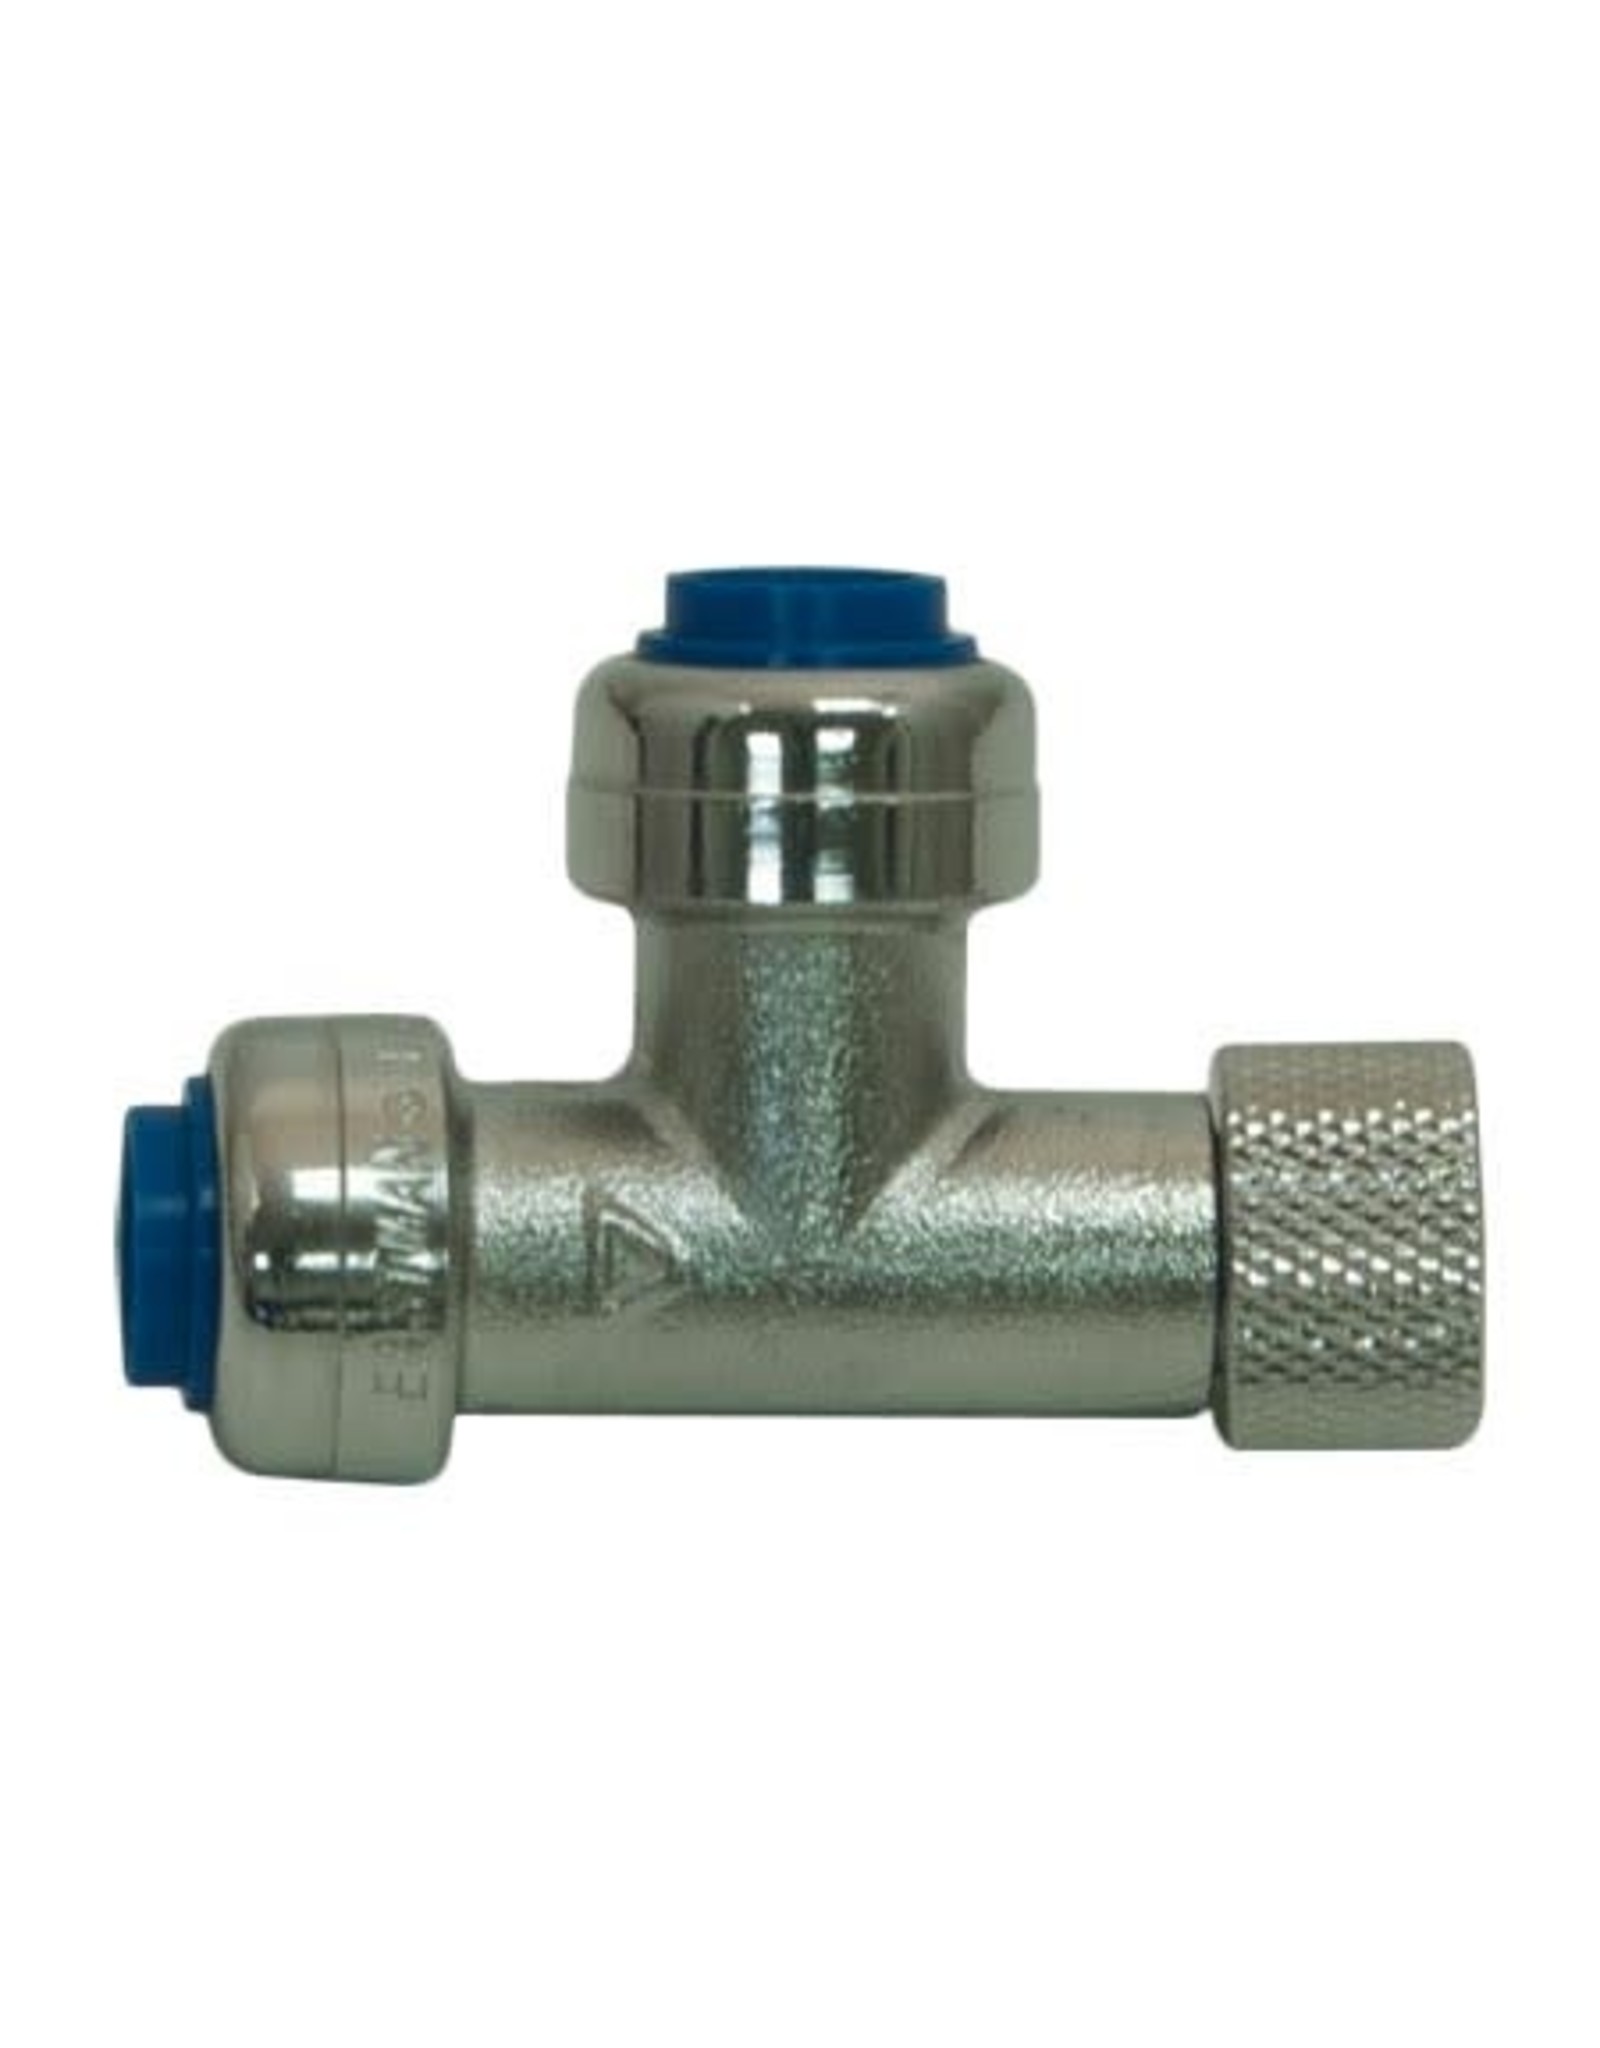 PUSH-FIT STOP VALVE TEE ADAPTER